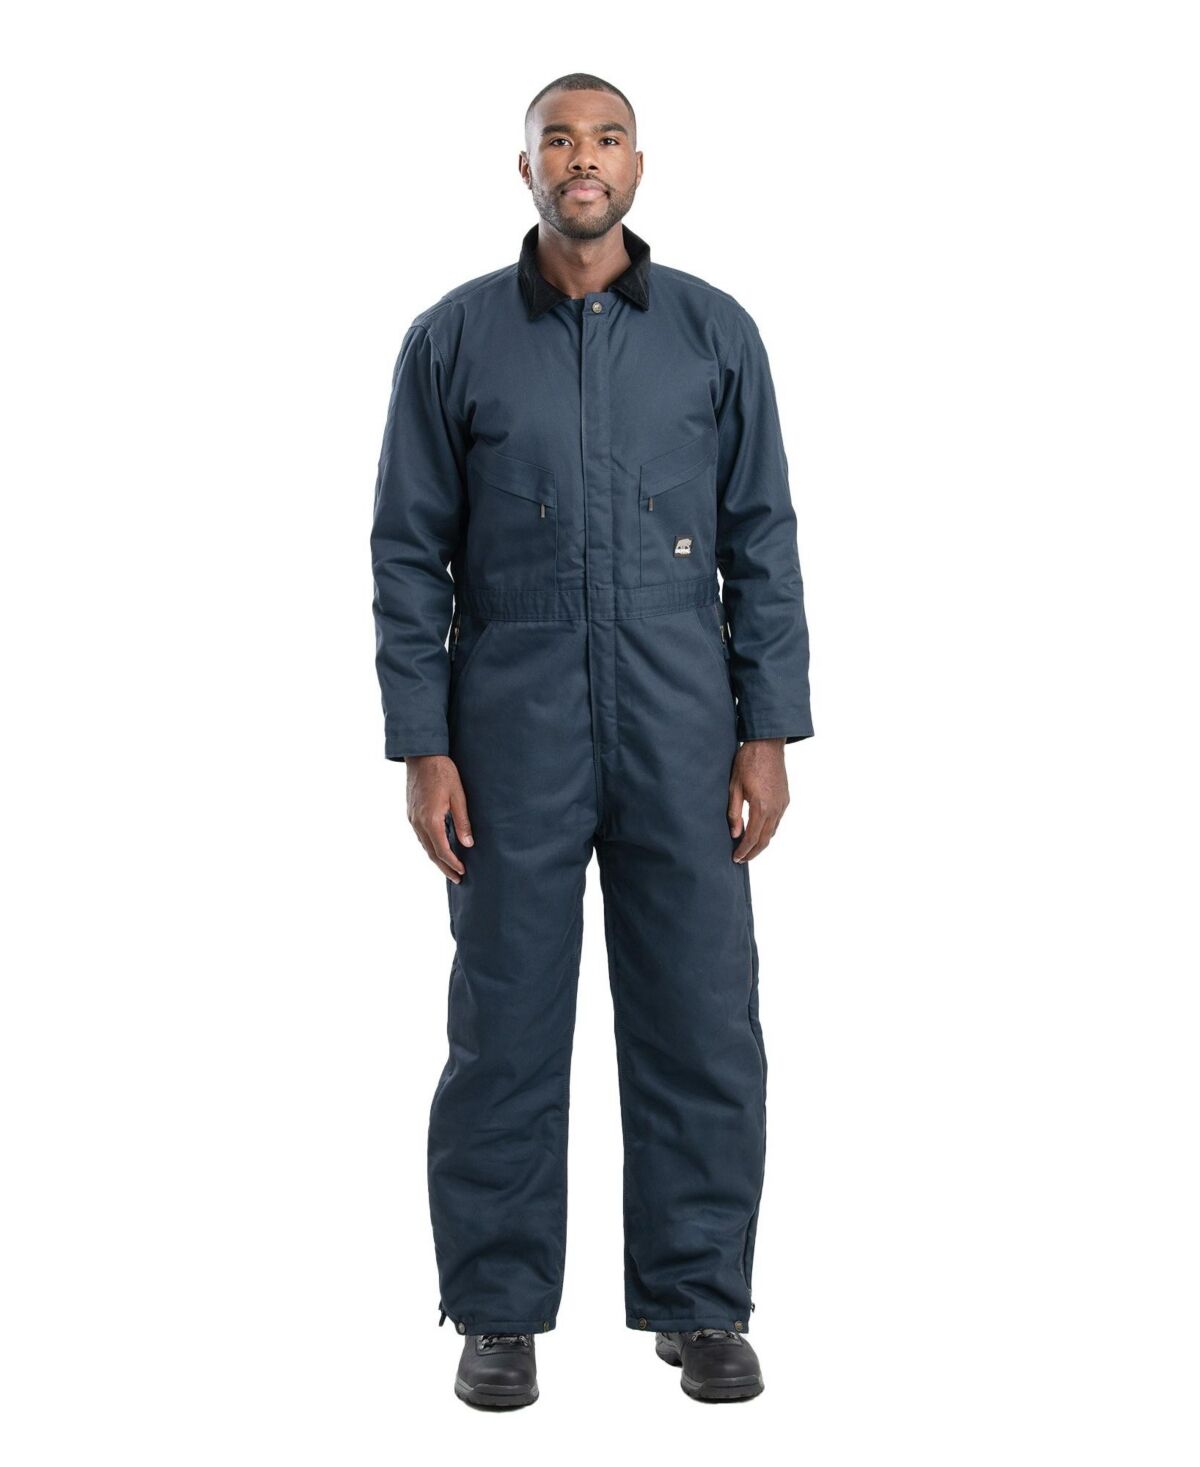 Berne Men's Heritage Twill Insulated Coverall - Navy